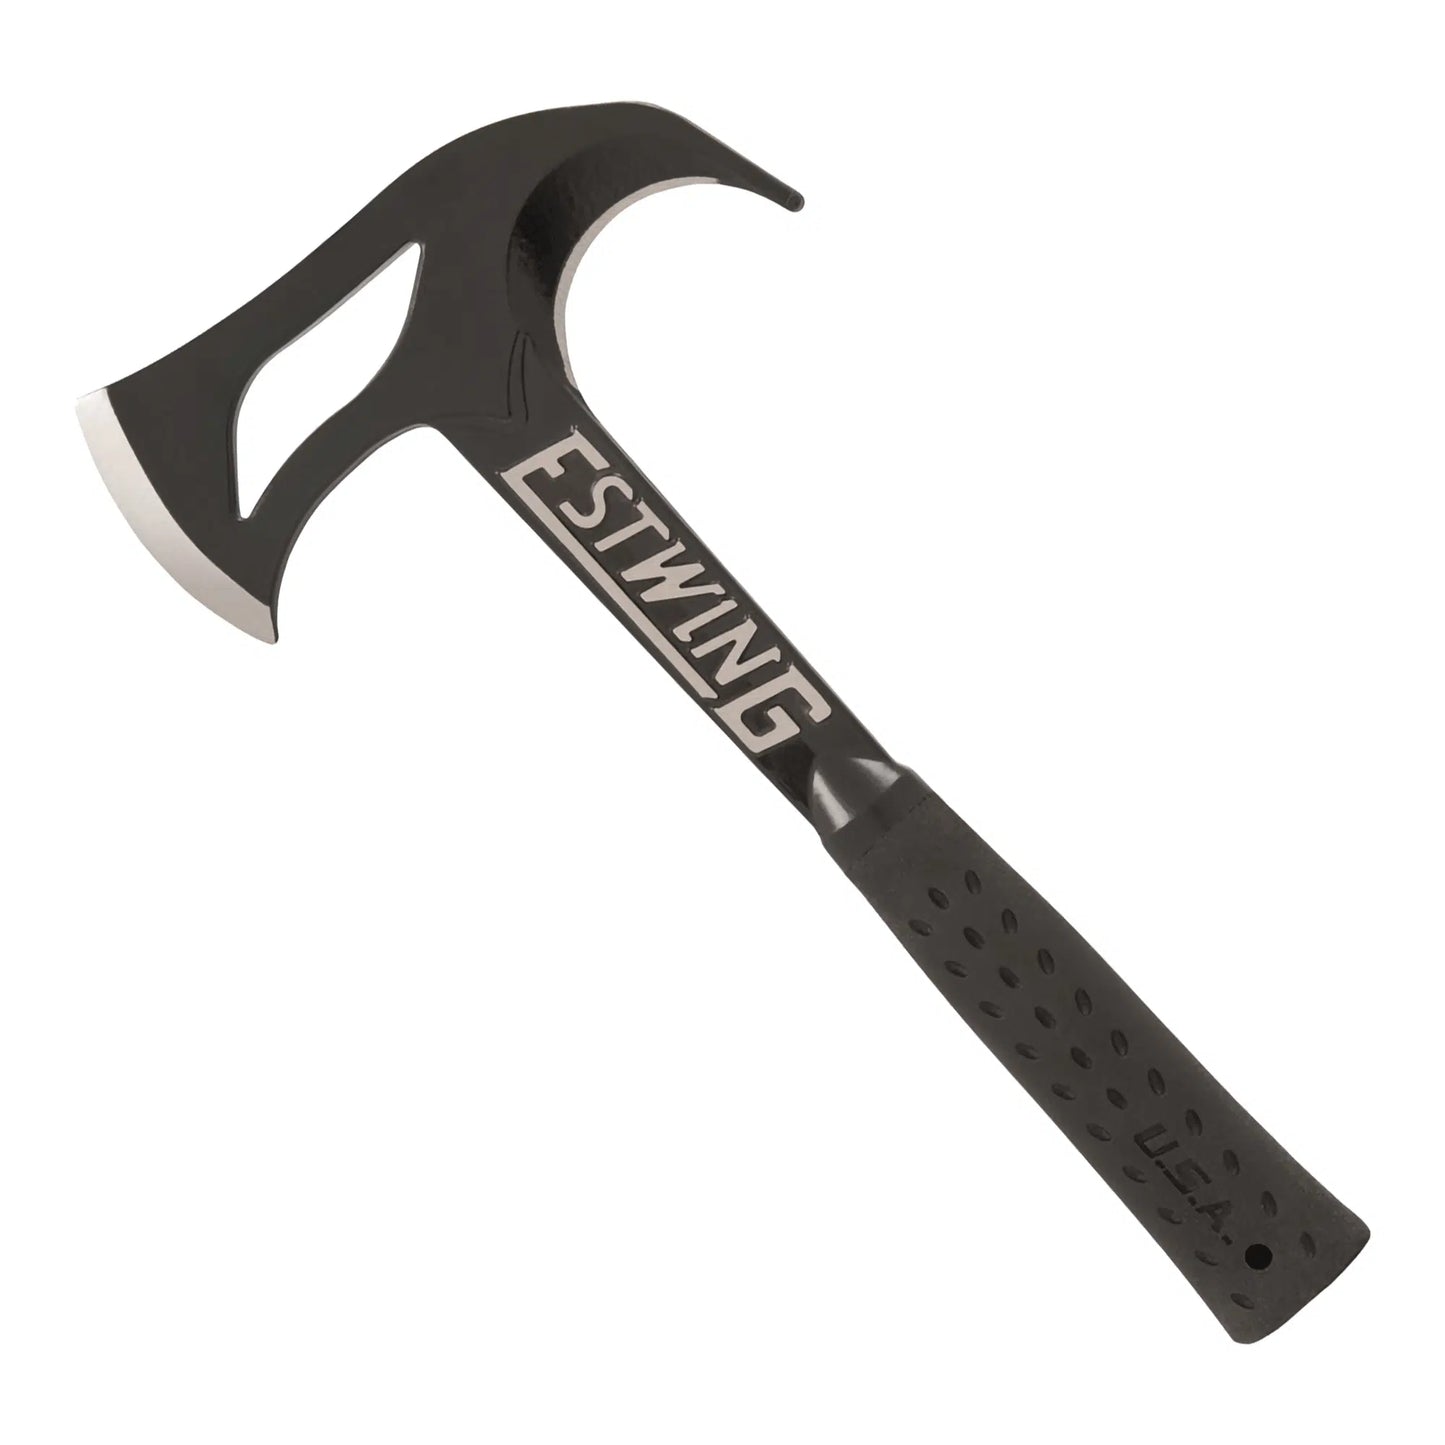 Estwing | 14.25" Hunter's Axe